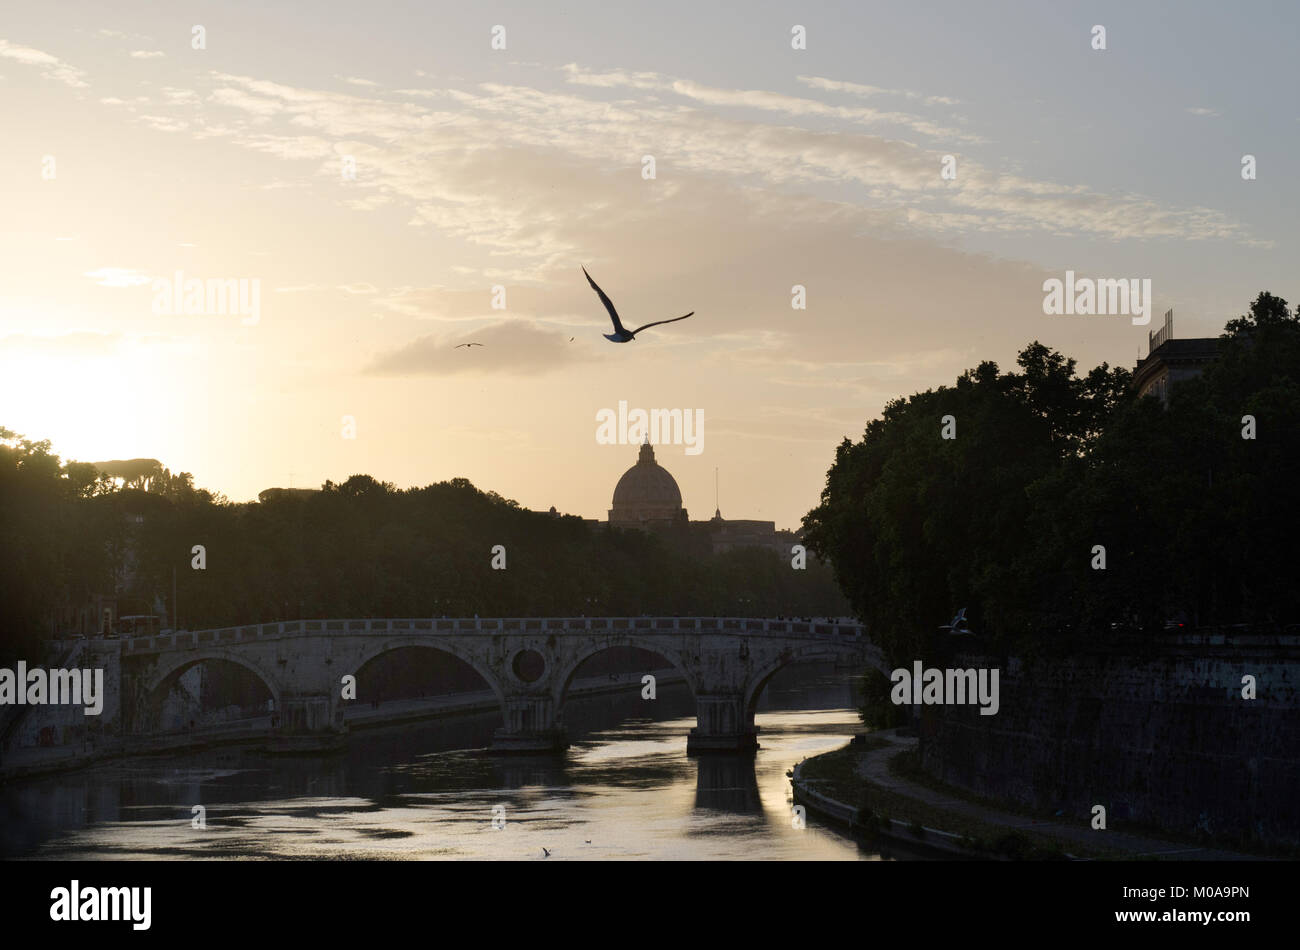 The sun sets over the River Tiber as the Vatican can be seen off in the distance in Rome, Italy, May 25, 2015. (Photo by Rod Lamkey Jr.) Stock Photo